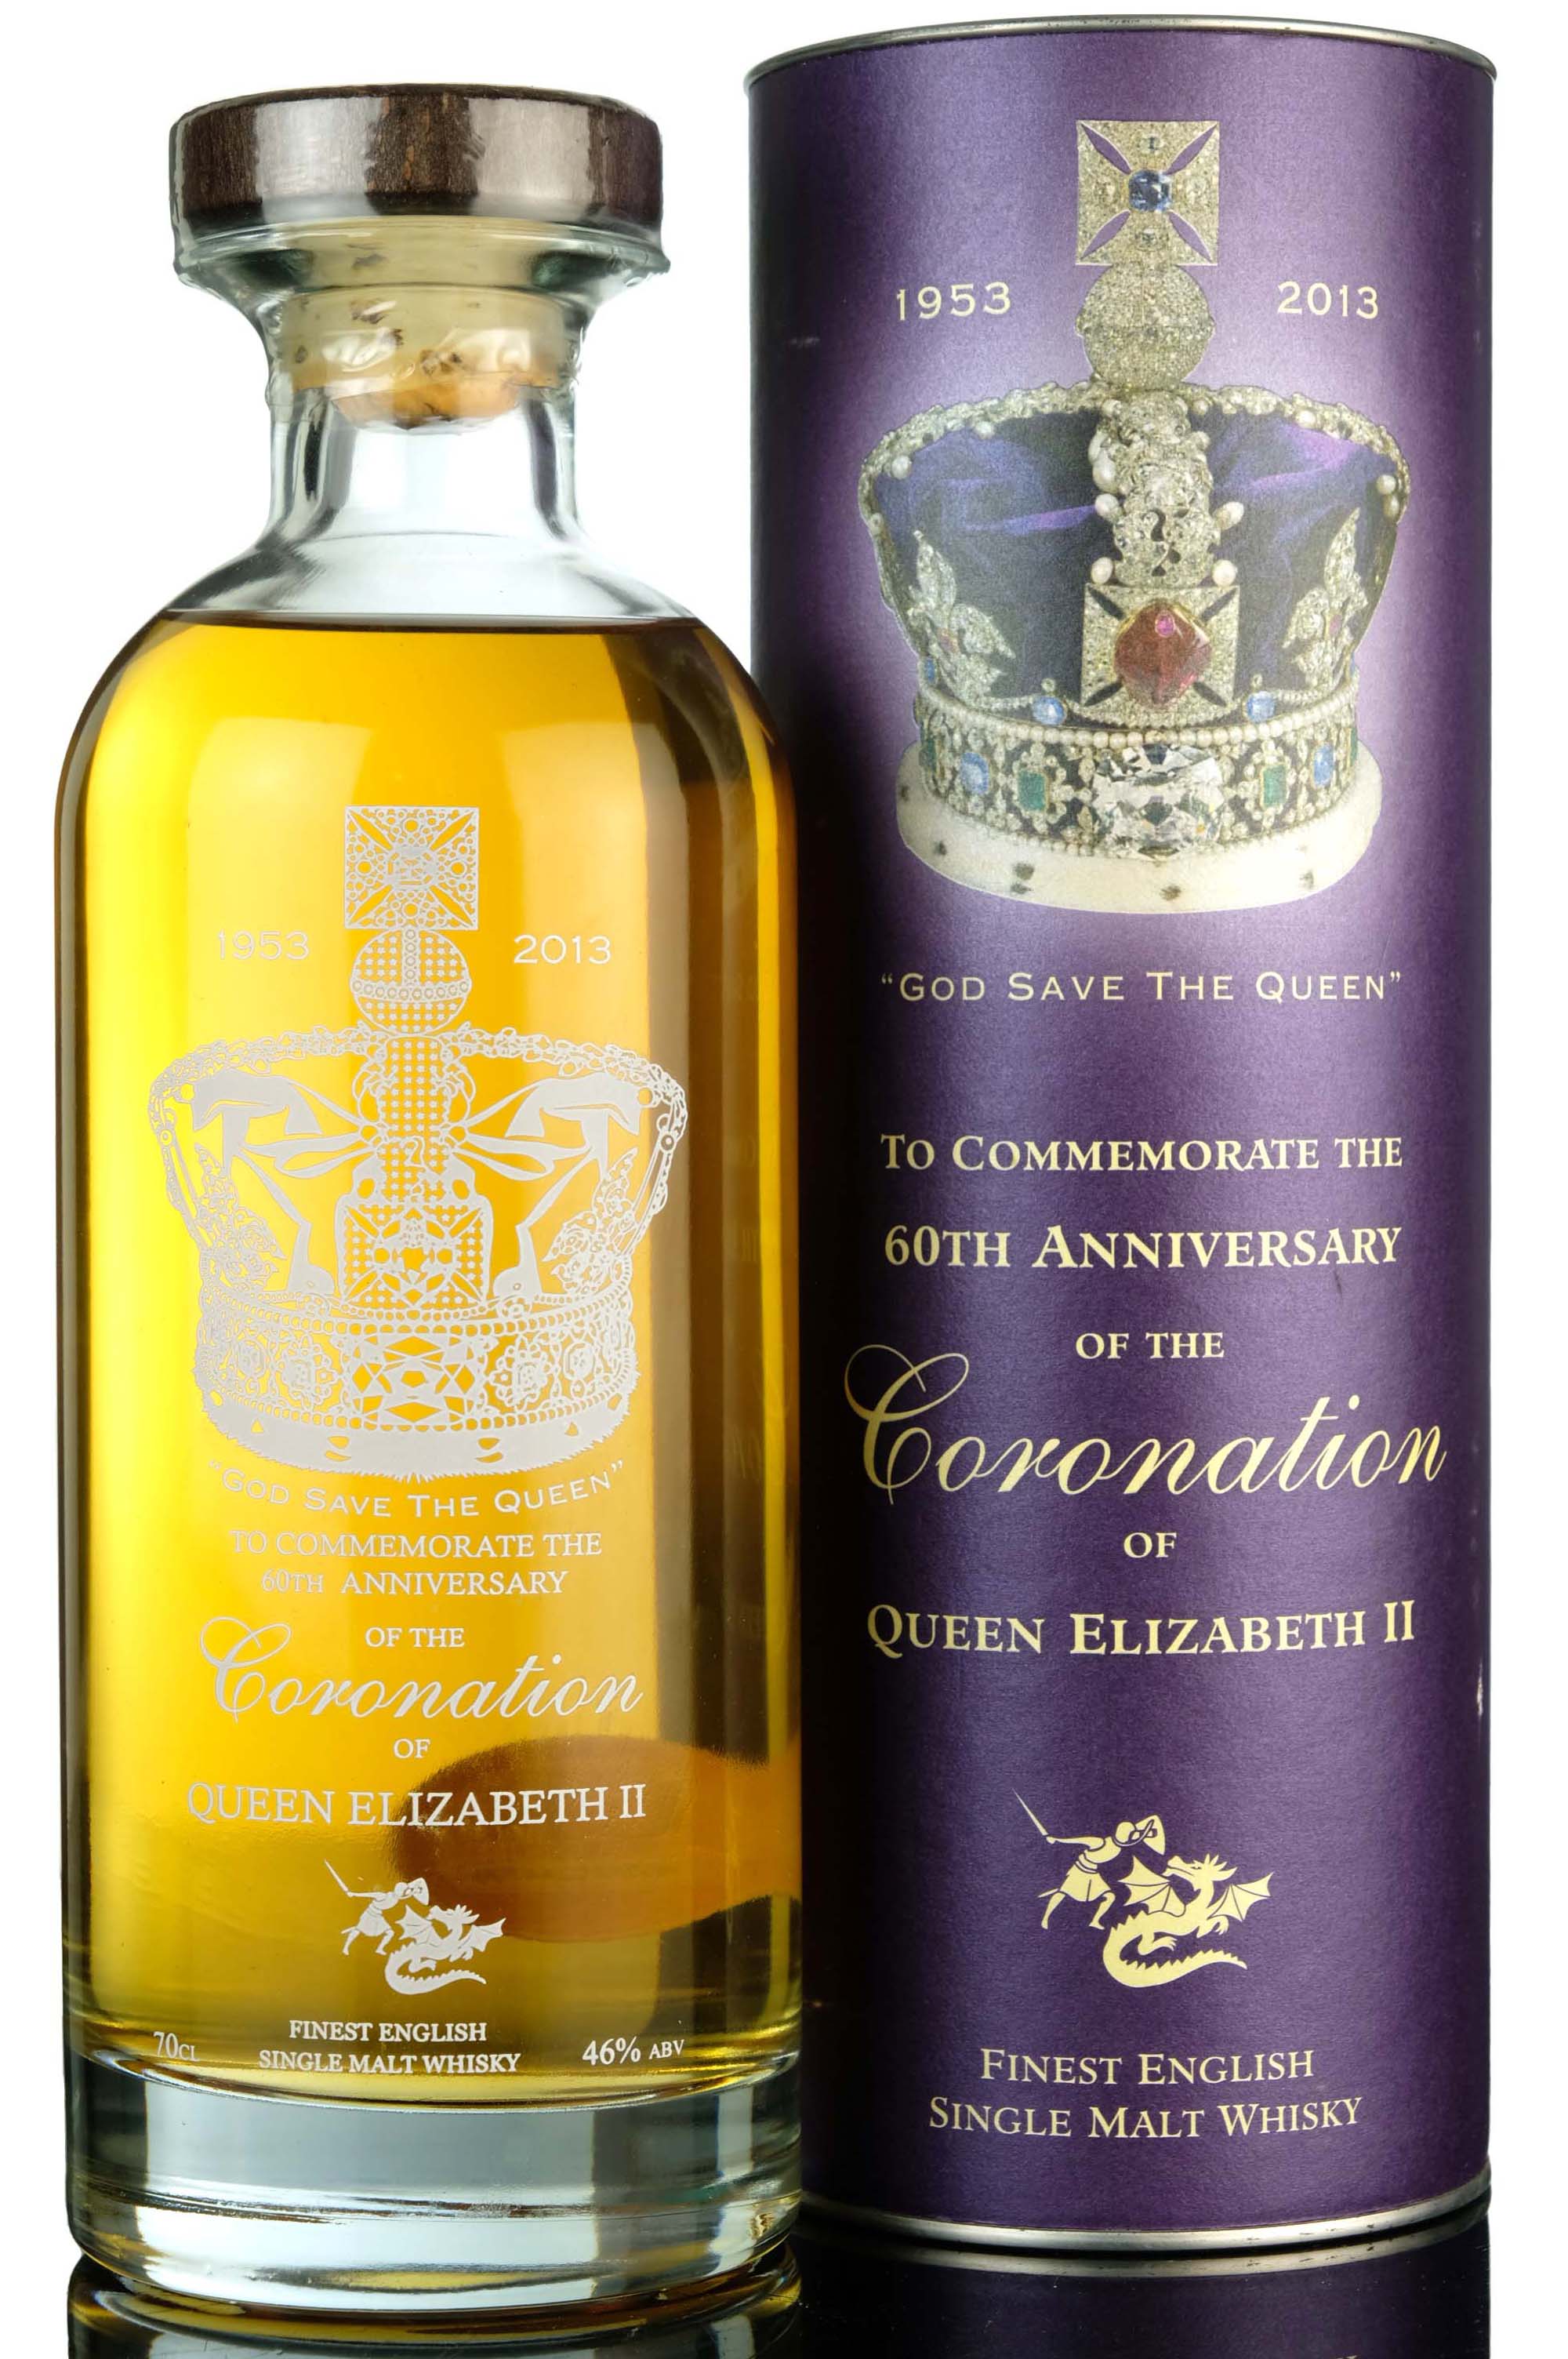 English Whisky To Commemorate The 60th Anniversary Of Queen Elizabeth II 1953-2013